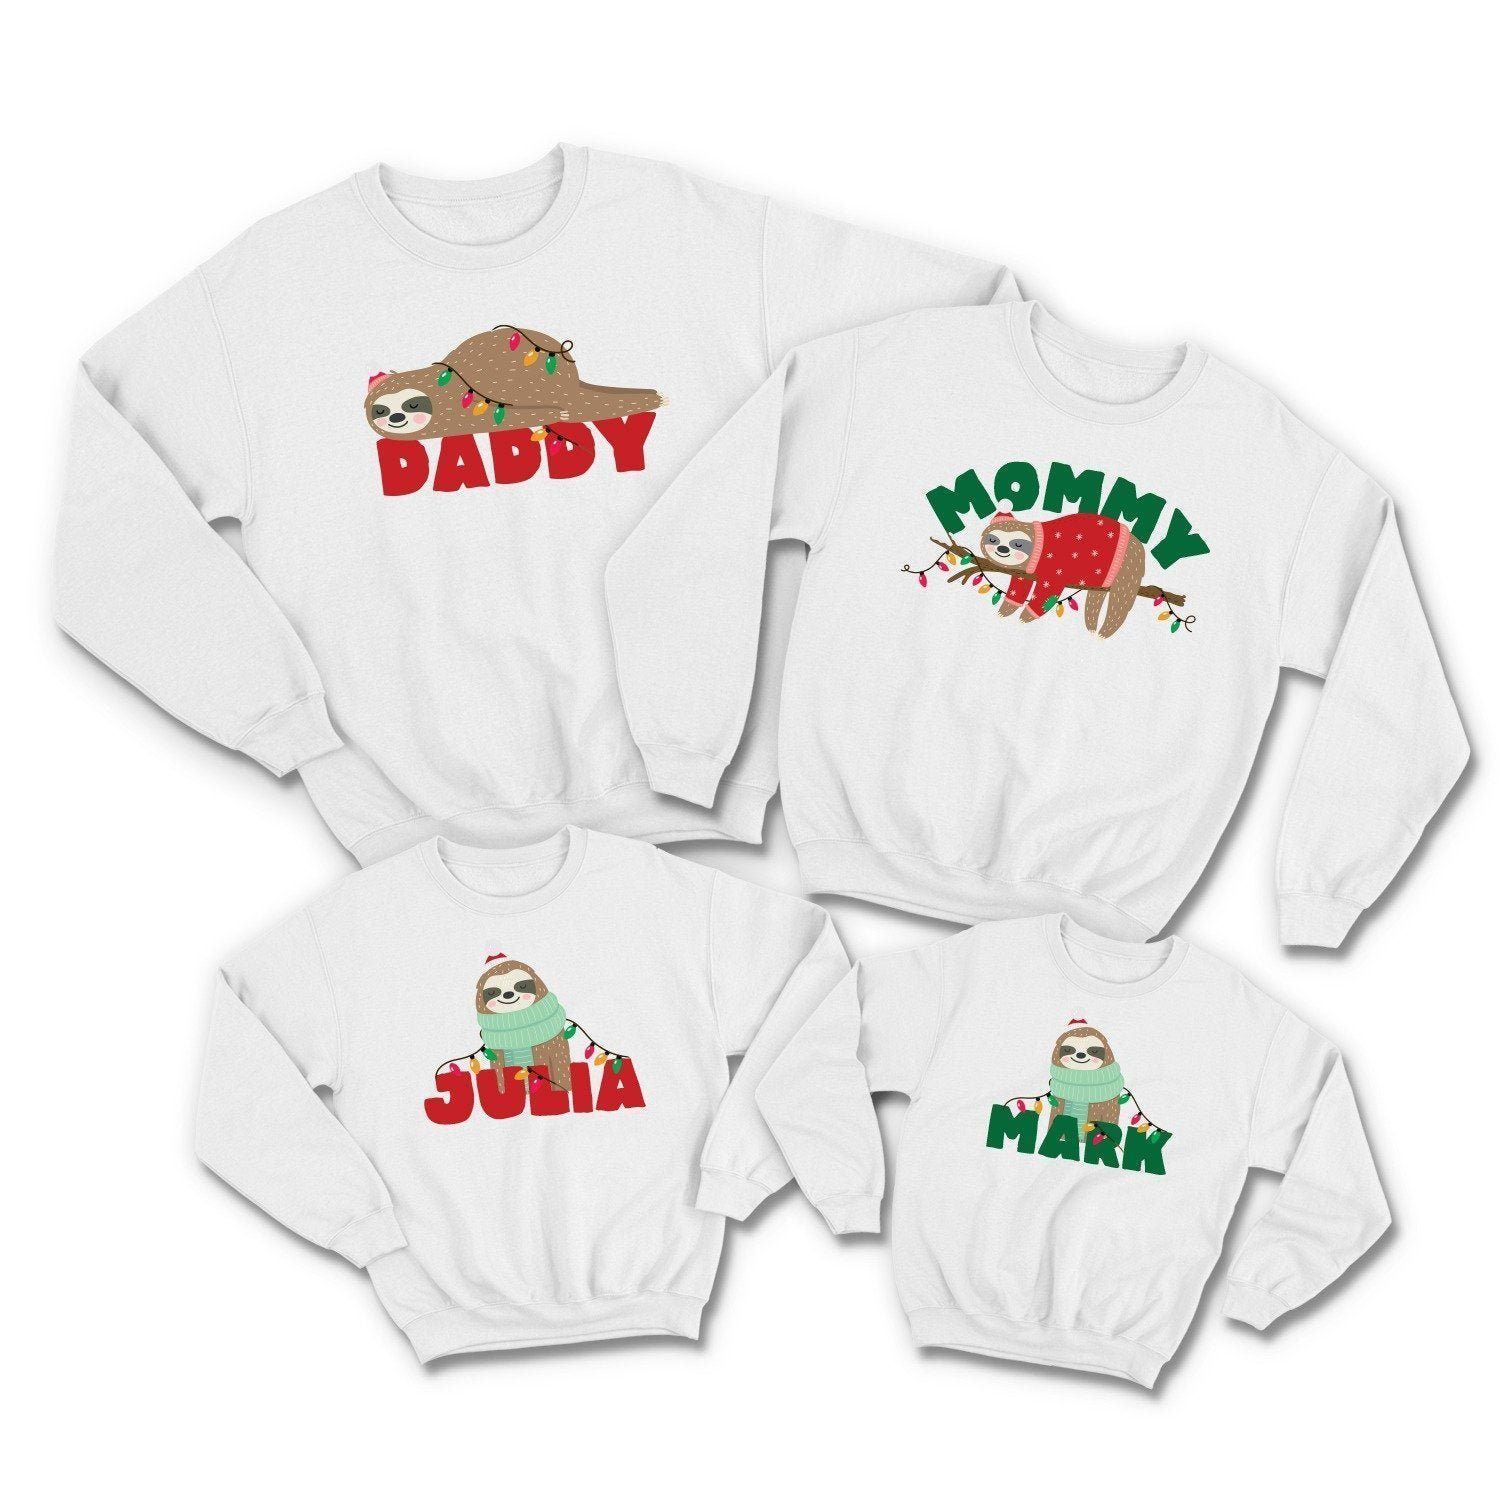 Matching Sloth Family Christmas Jumper, Matching Family Christmas Outfit